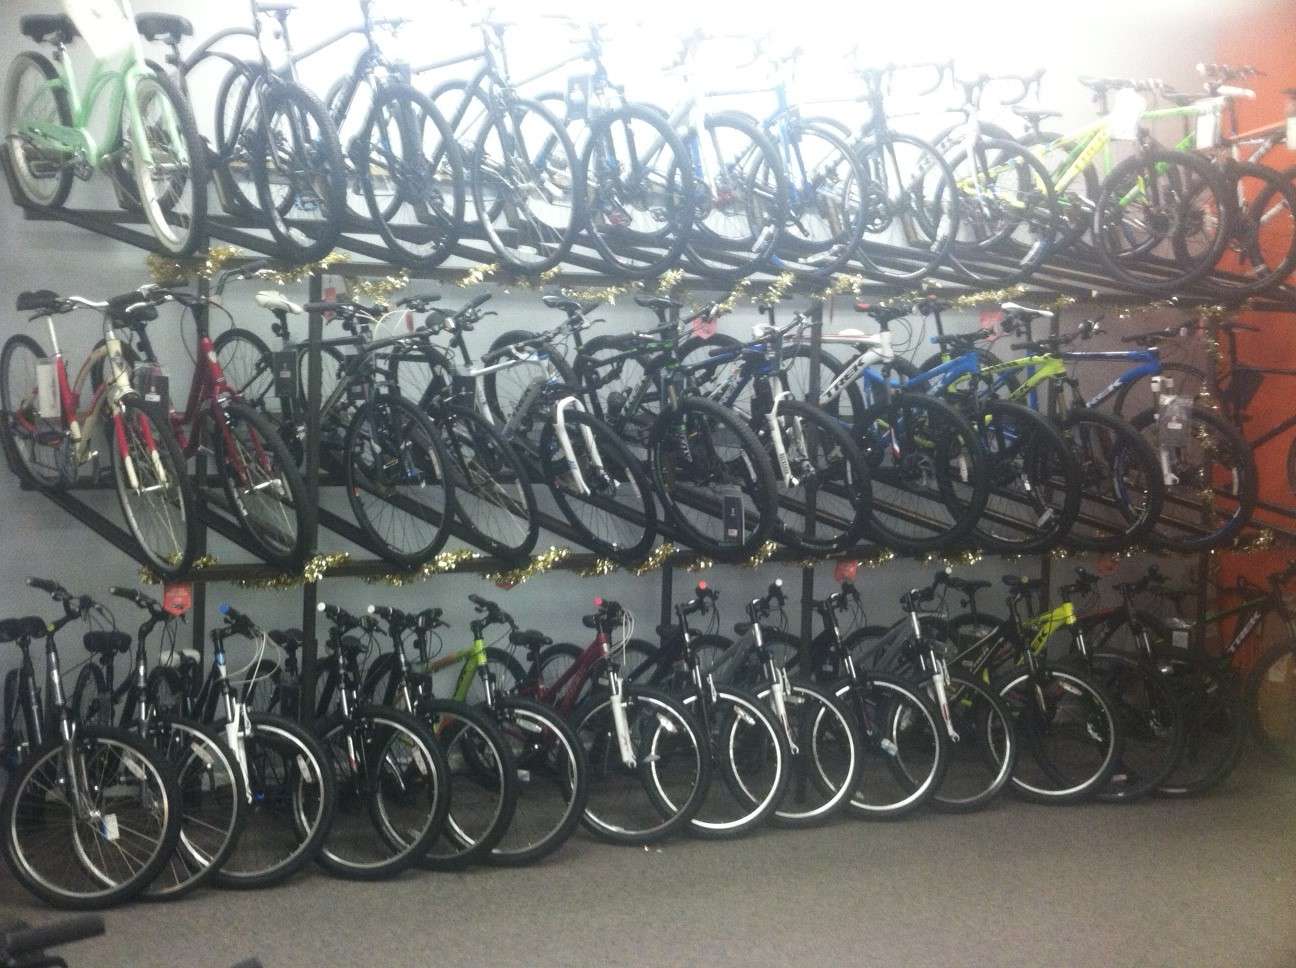 places that sell bikes near me